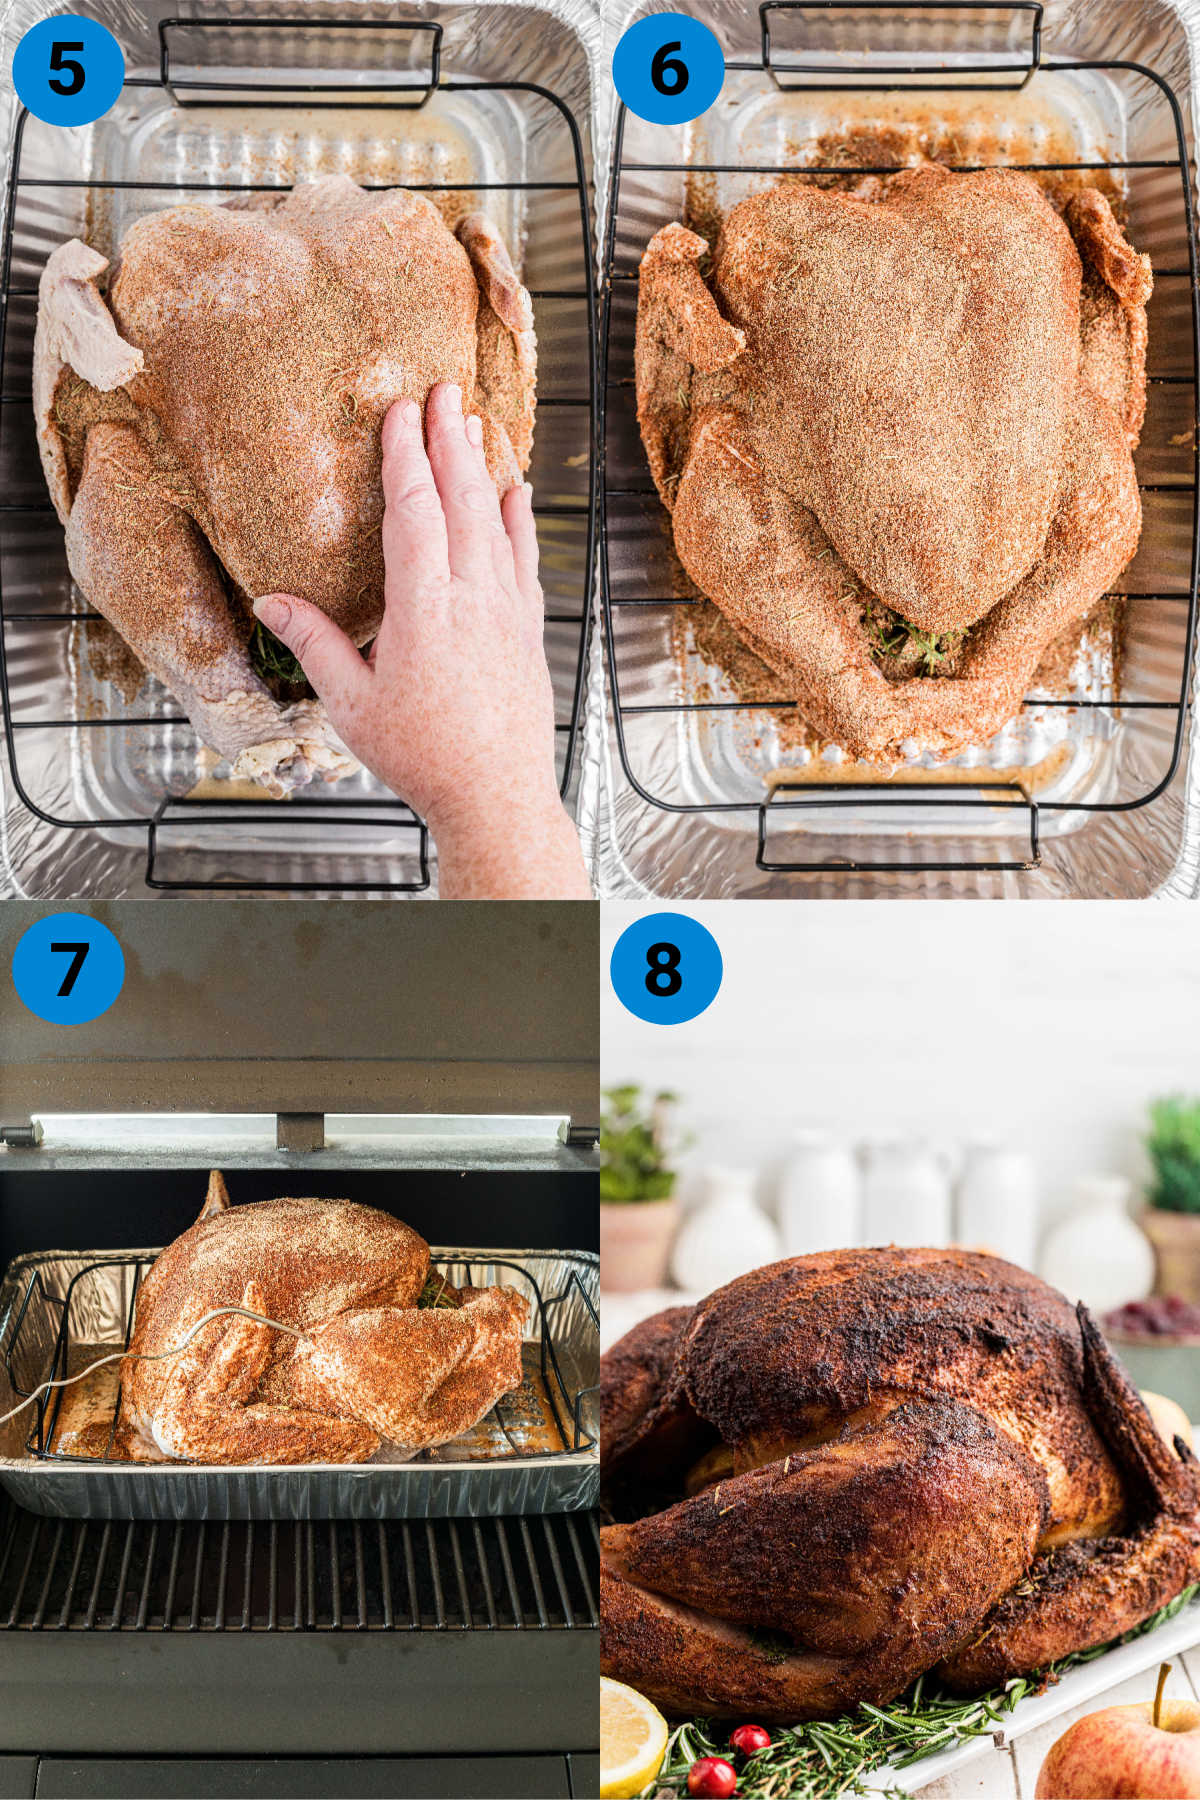 A collage of four images showing how to make a pellet grill smoked turkey - steps 5-8.